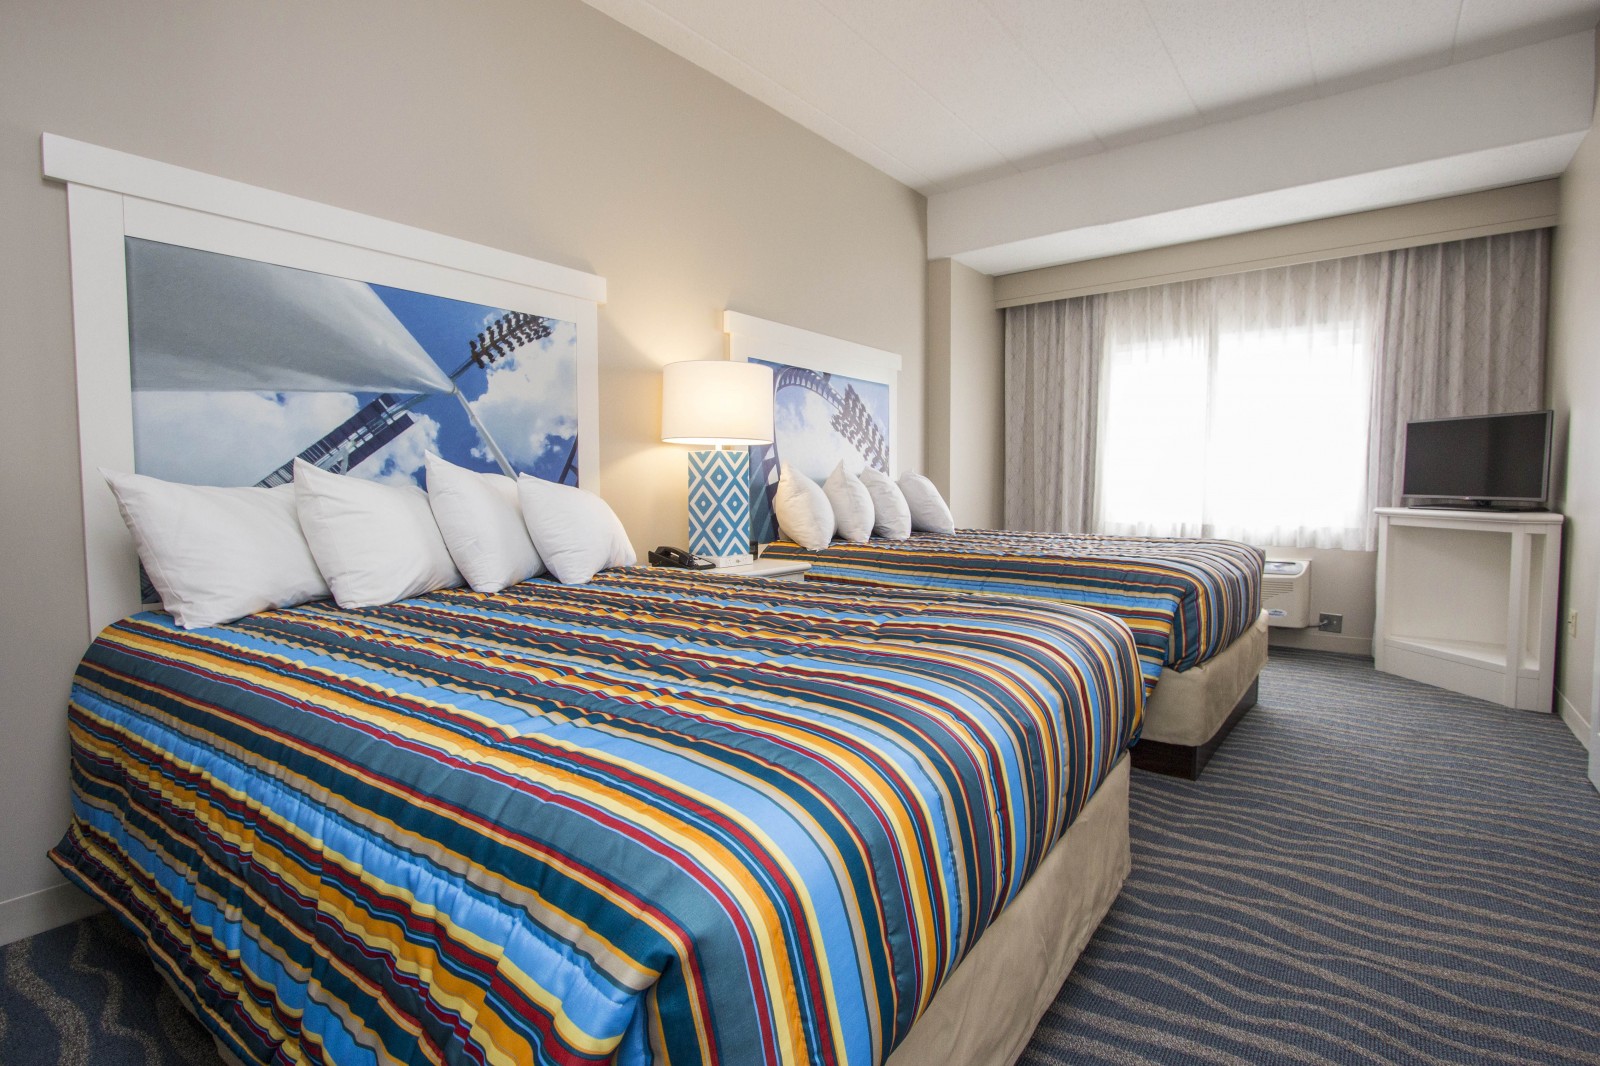 Cedar Point's Signature Hotel Breakers Opens in Just Days (picture courtesy of Cedar Point) |Sharon the Moments Blog